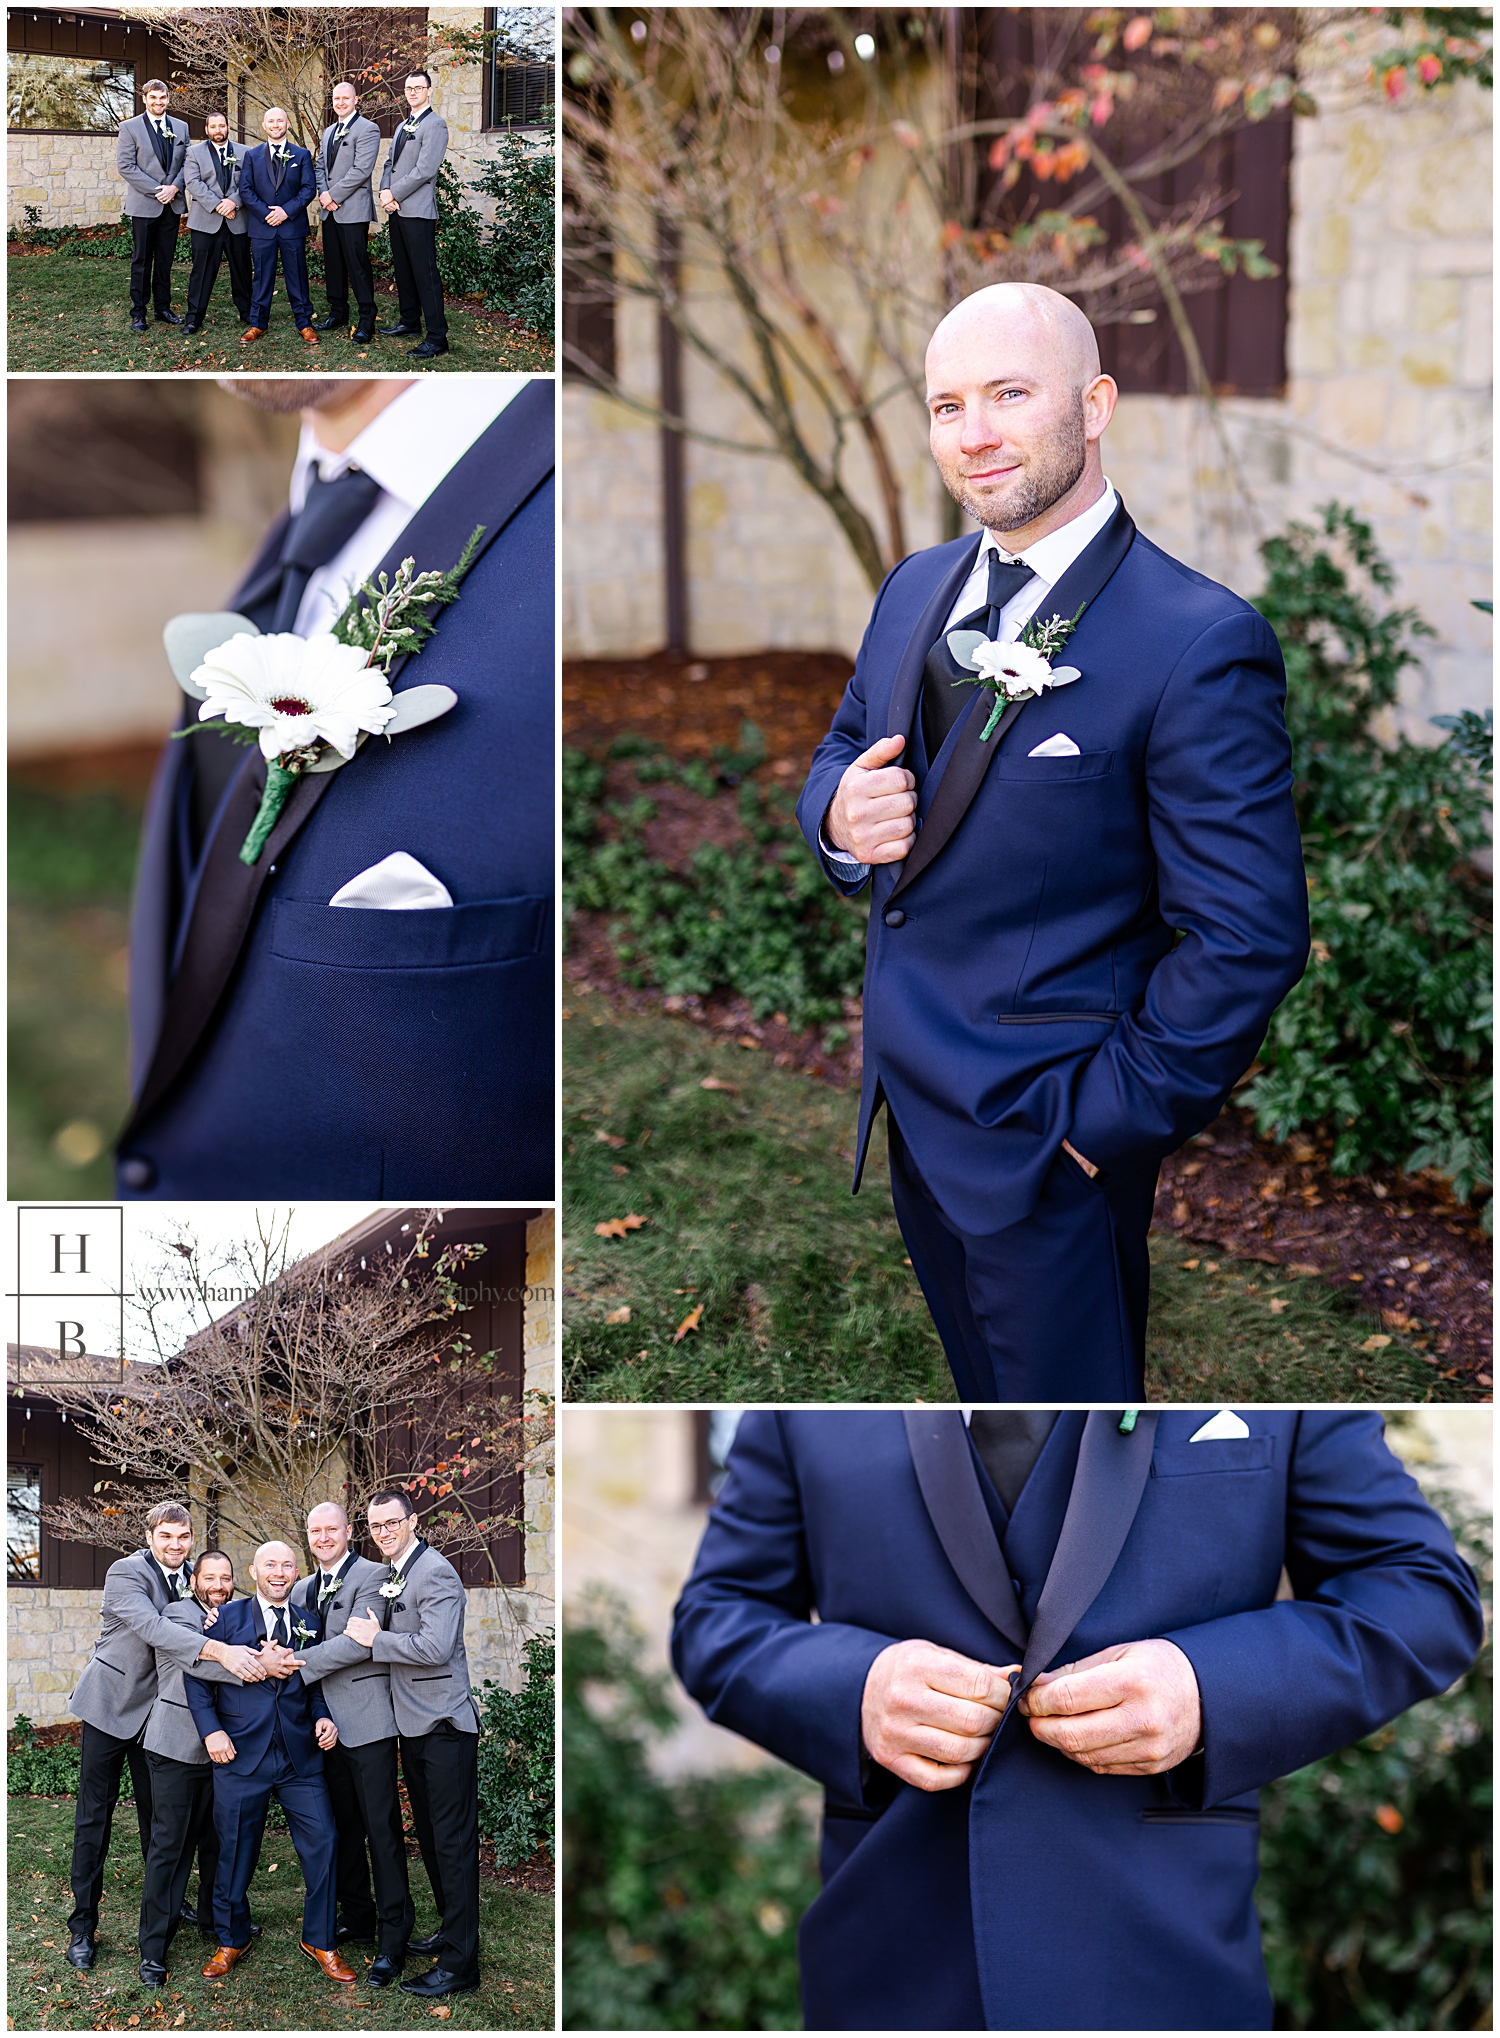 Groom in navy tux poses with groomsmen in grey jackets and black pants.